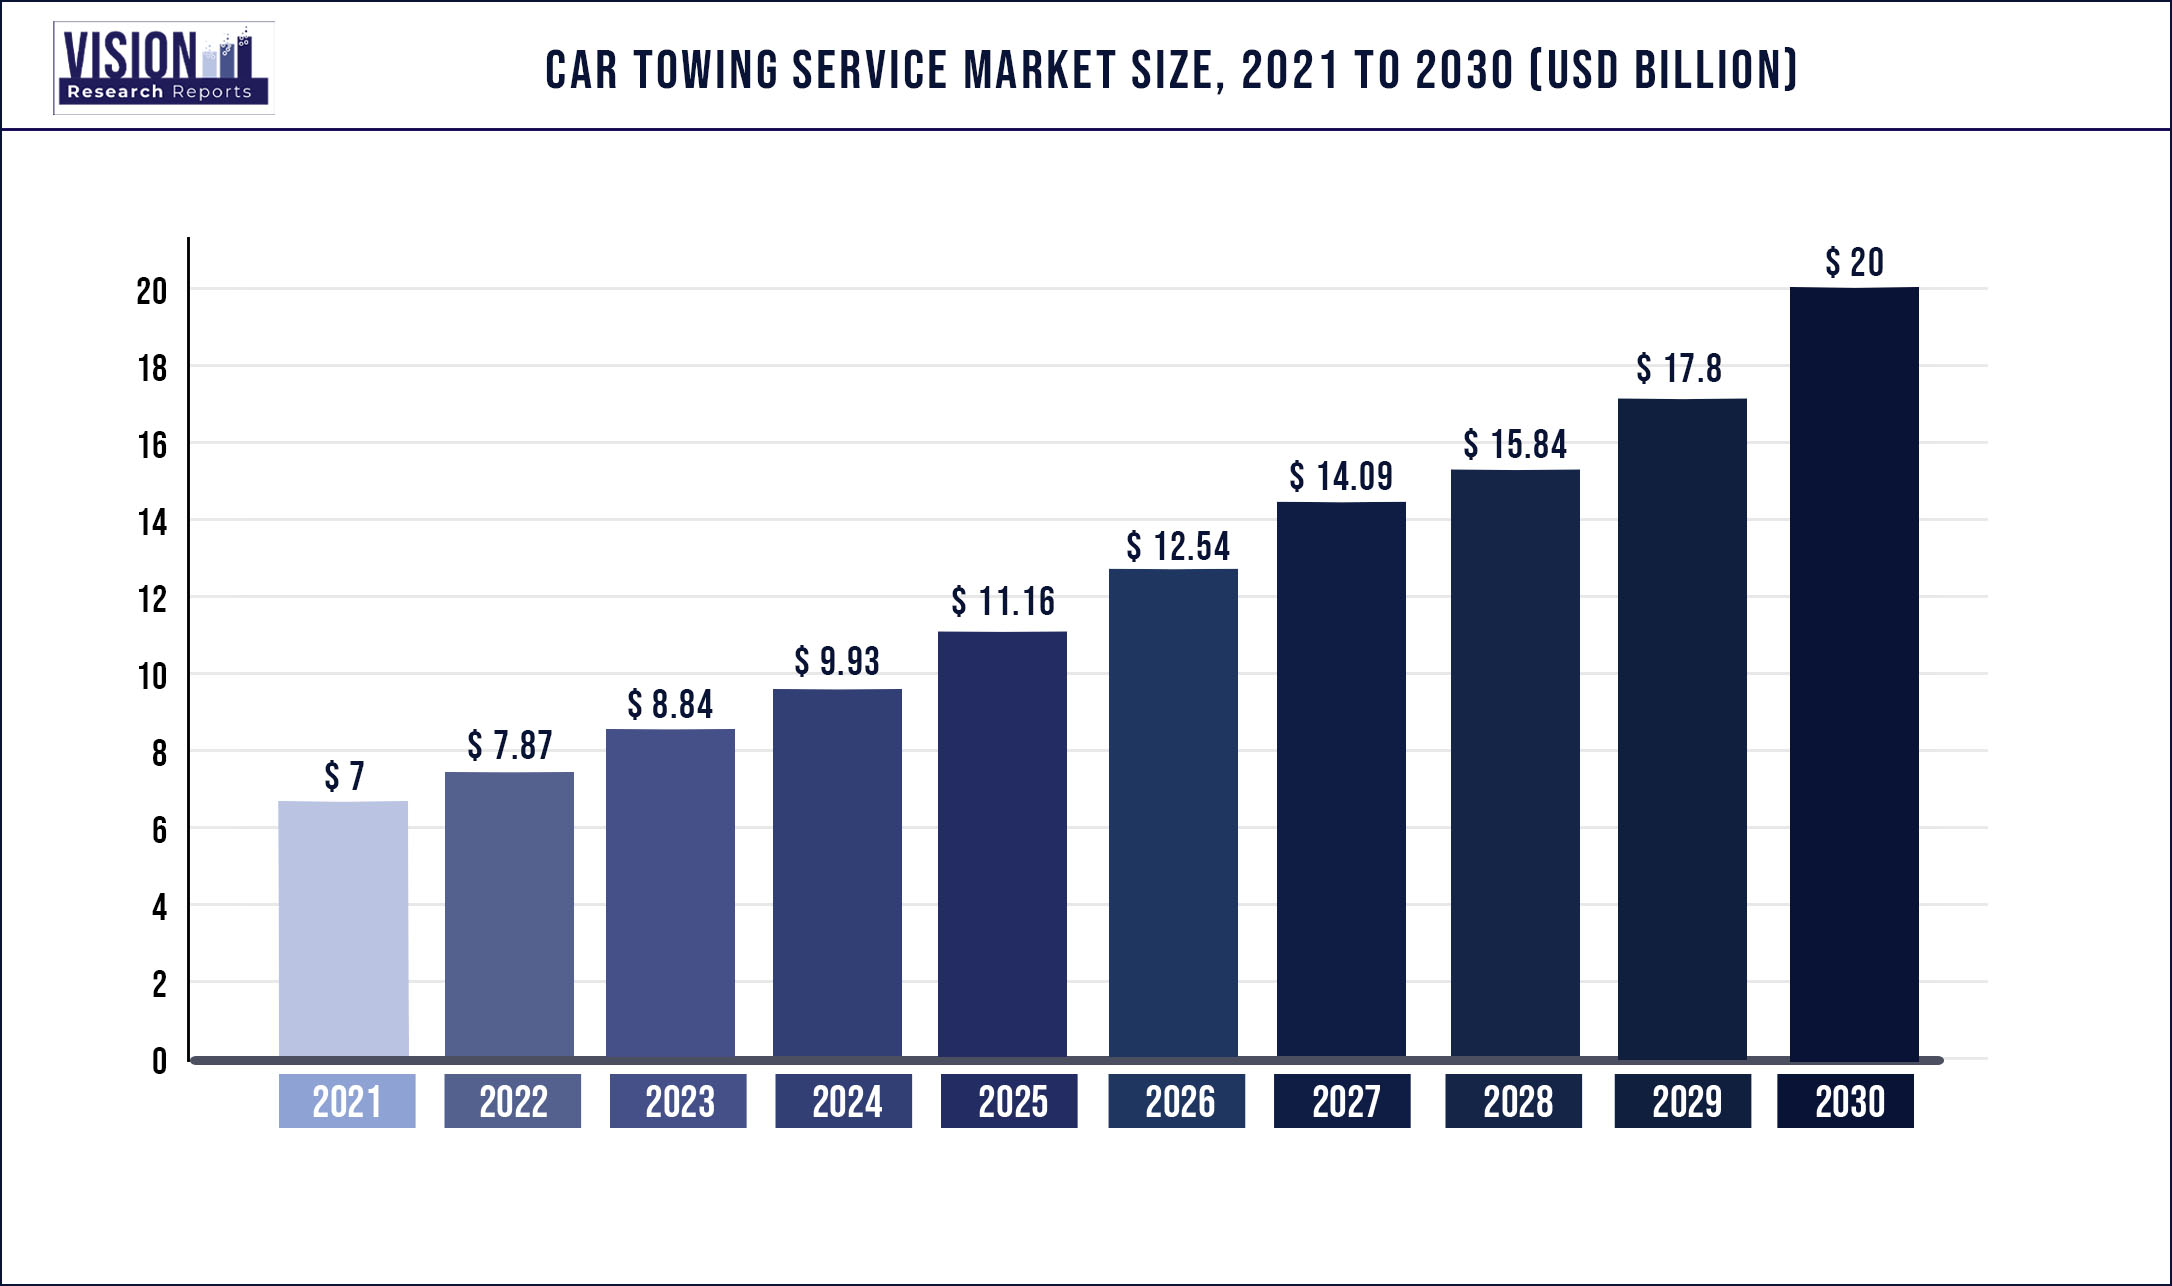 Car Towing Service Market Size 2021 to 2030